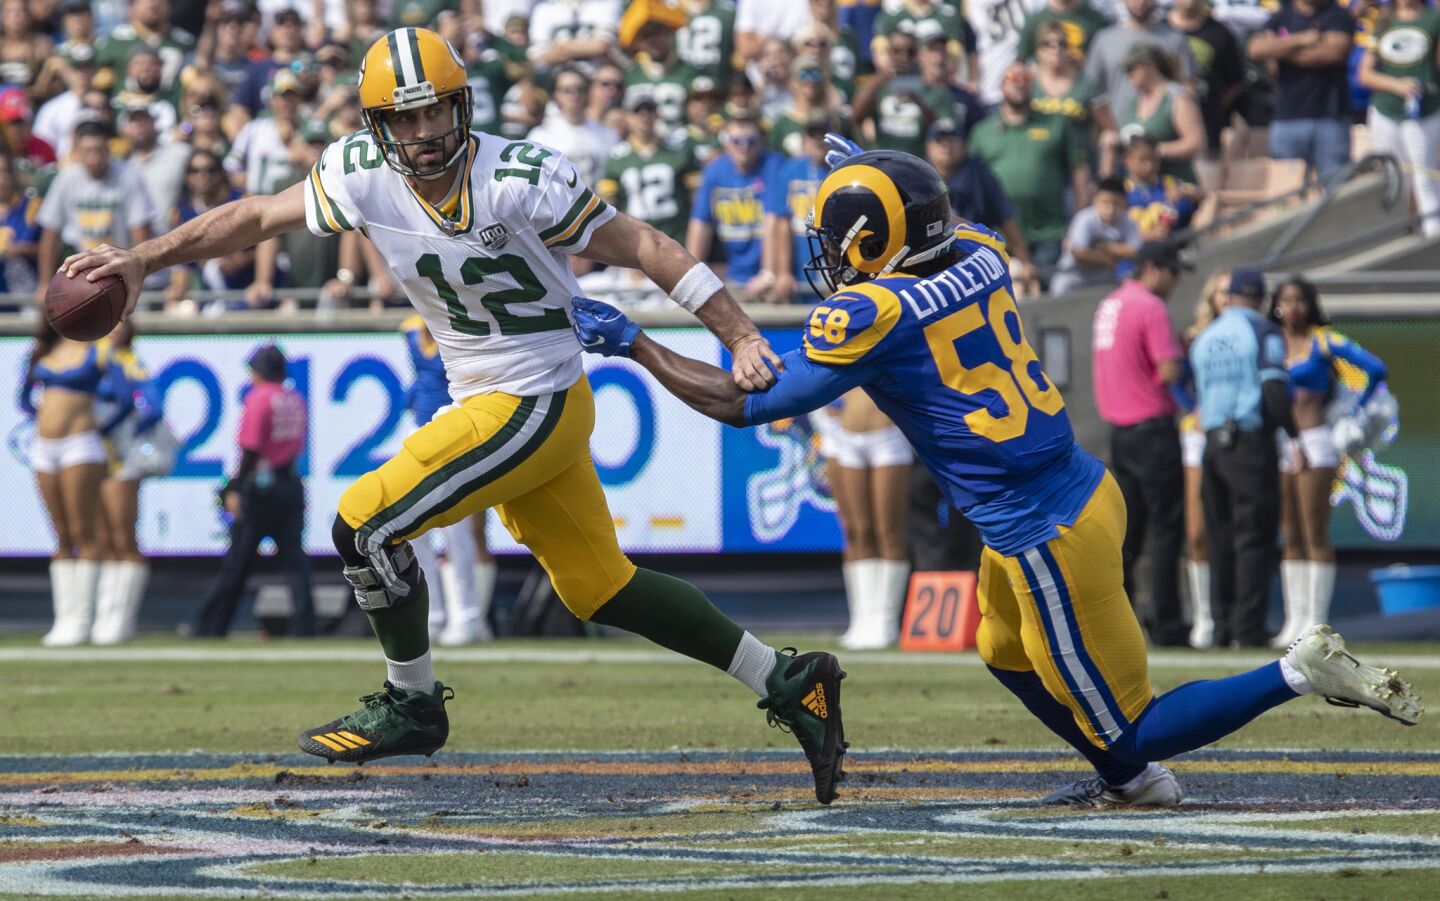 Rams' Cory Littleton, right, sacks Green Bay Packers quarterback Aaron Rodgers in the first quarter at the Coliseum on Sunday.